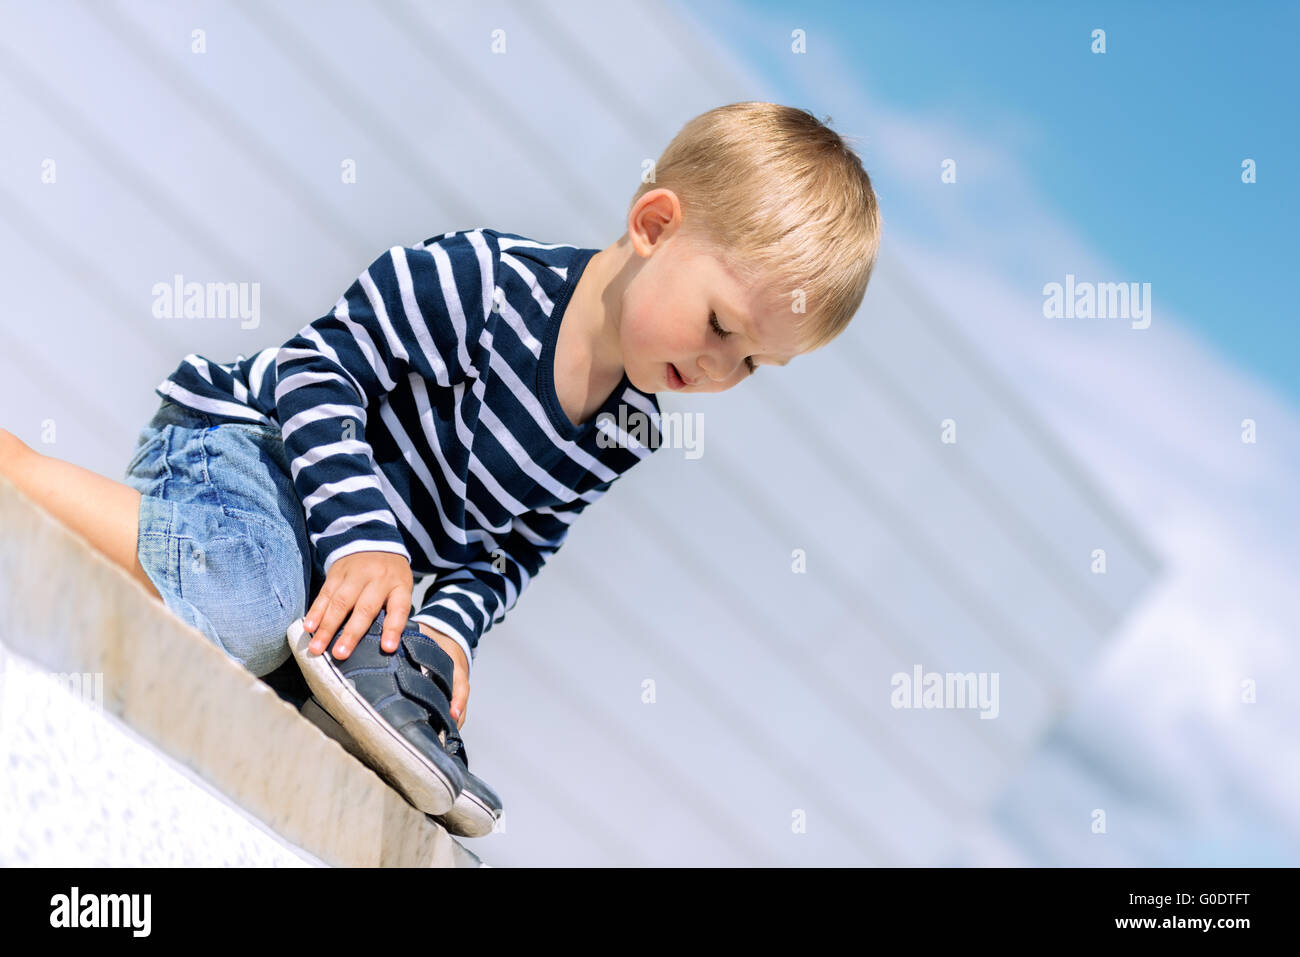 Portrait of little preschool boy outdoors with shoes Stock Photo